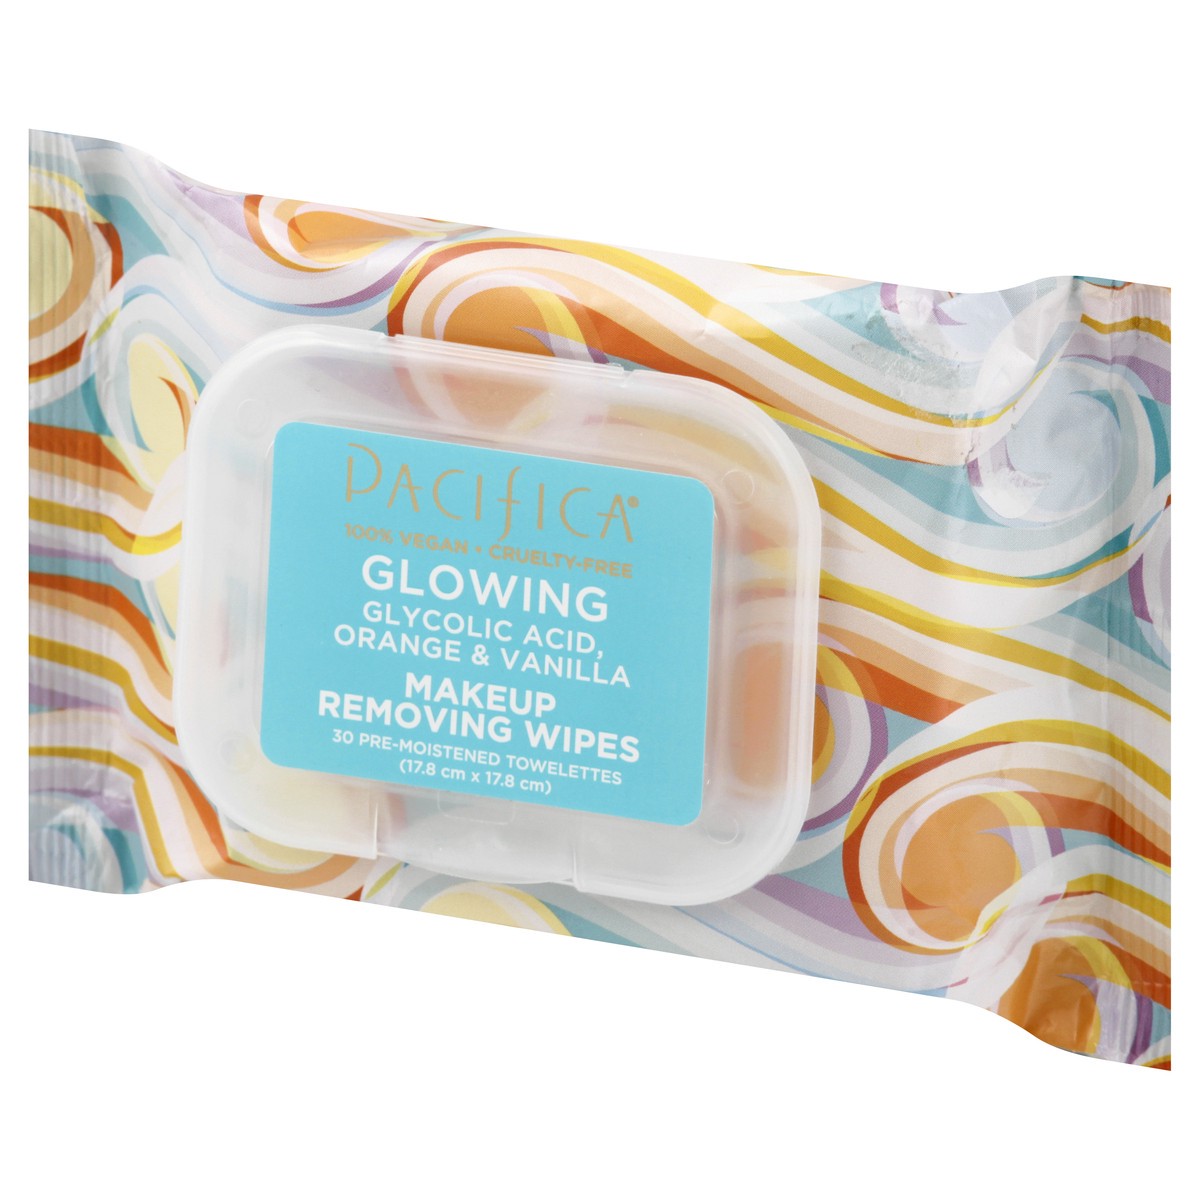 slide 3 of 9, Pacifica Pre-Moistened Makeup Removing Wipes Glowing Glycolic Acid, Orange & Vanilla Towelettes 30 ea, 30 ct